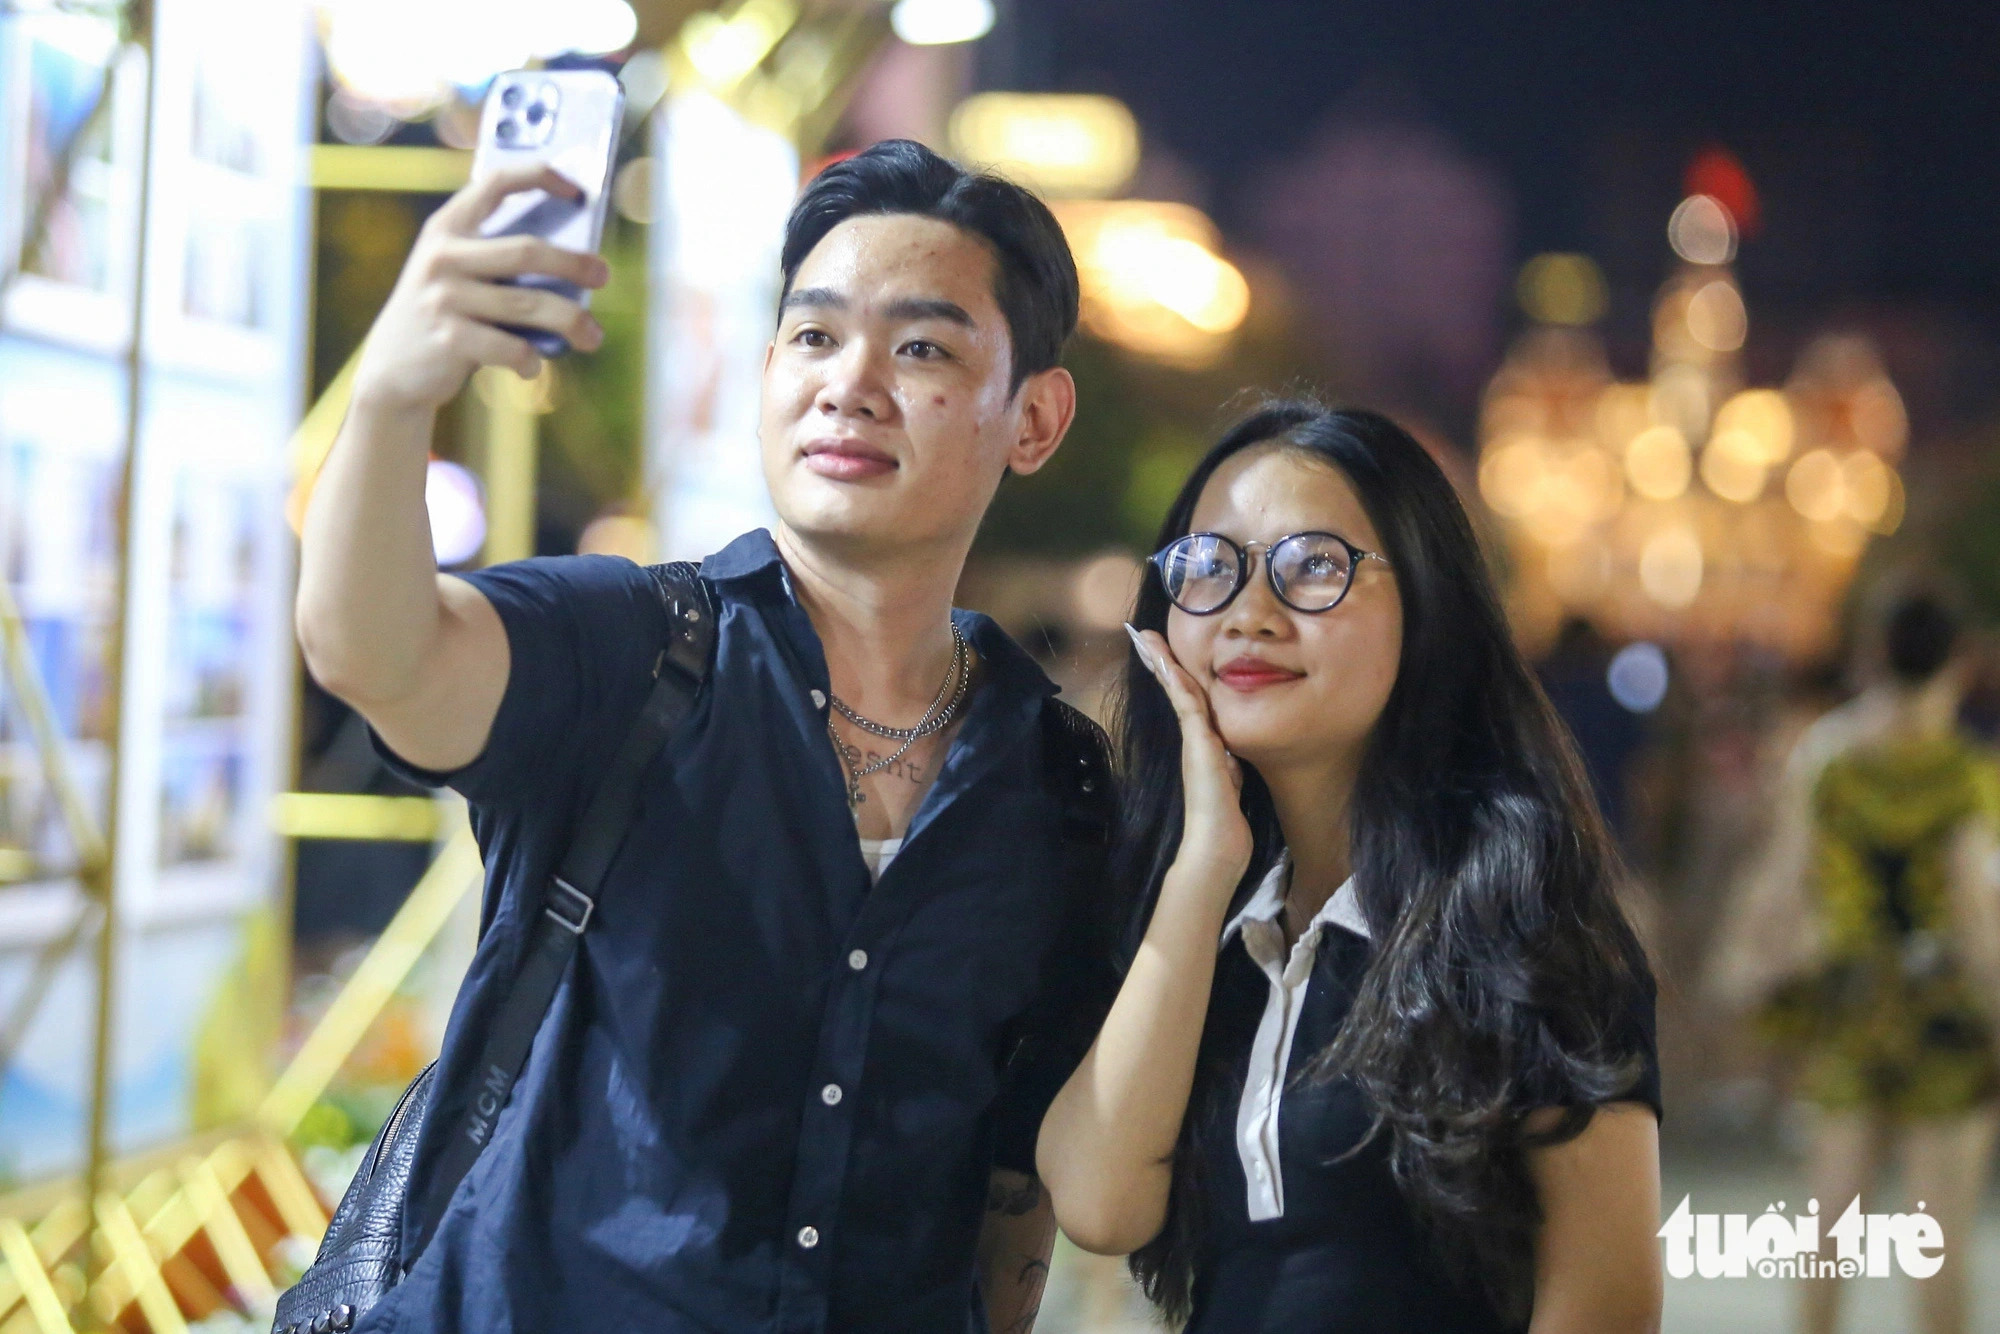 Hiep and Khanh Ly, residing in Dak Lak Province in Vietnam’s Central Highlands region, traveled to Ho Chi Minh City to enjoy the public holiday to commemorate Vietnam’s Reunification Day and International Workers’ Day (May 1). In this photo, the duo take a selfie prior to a firework show. Photo: Phuong Quyen / Tuoi Tre